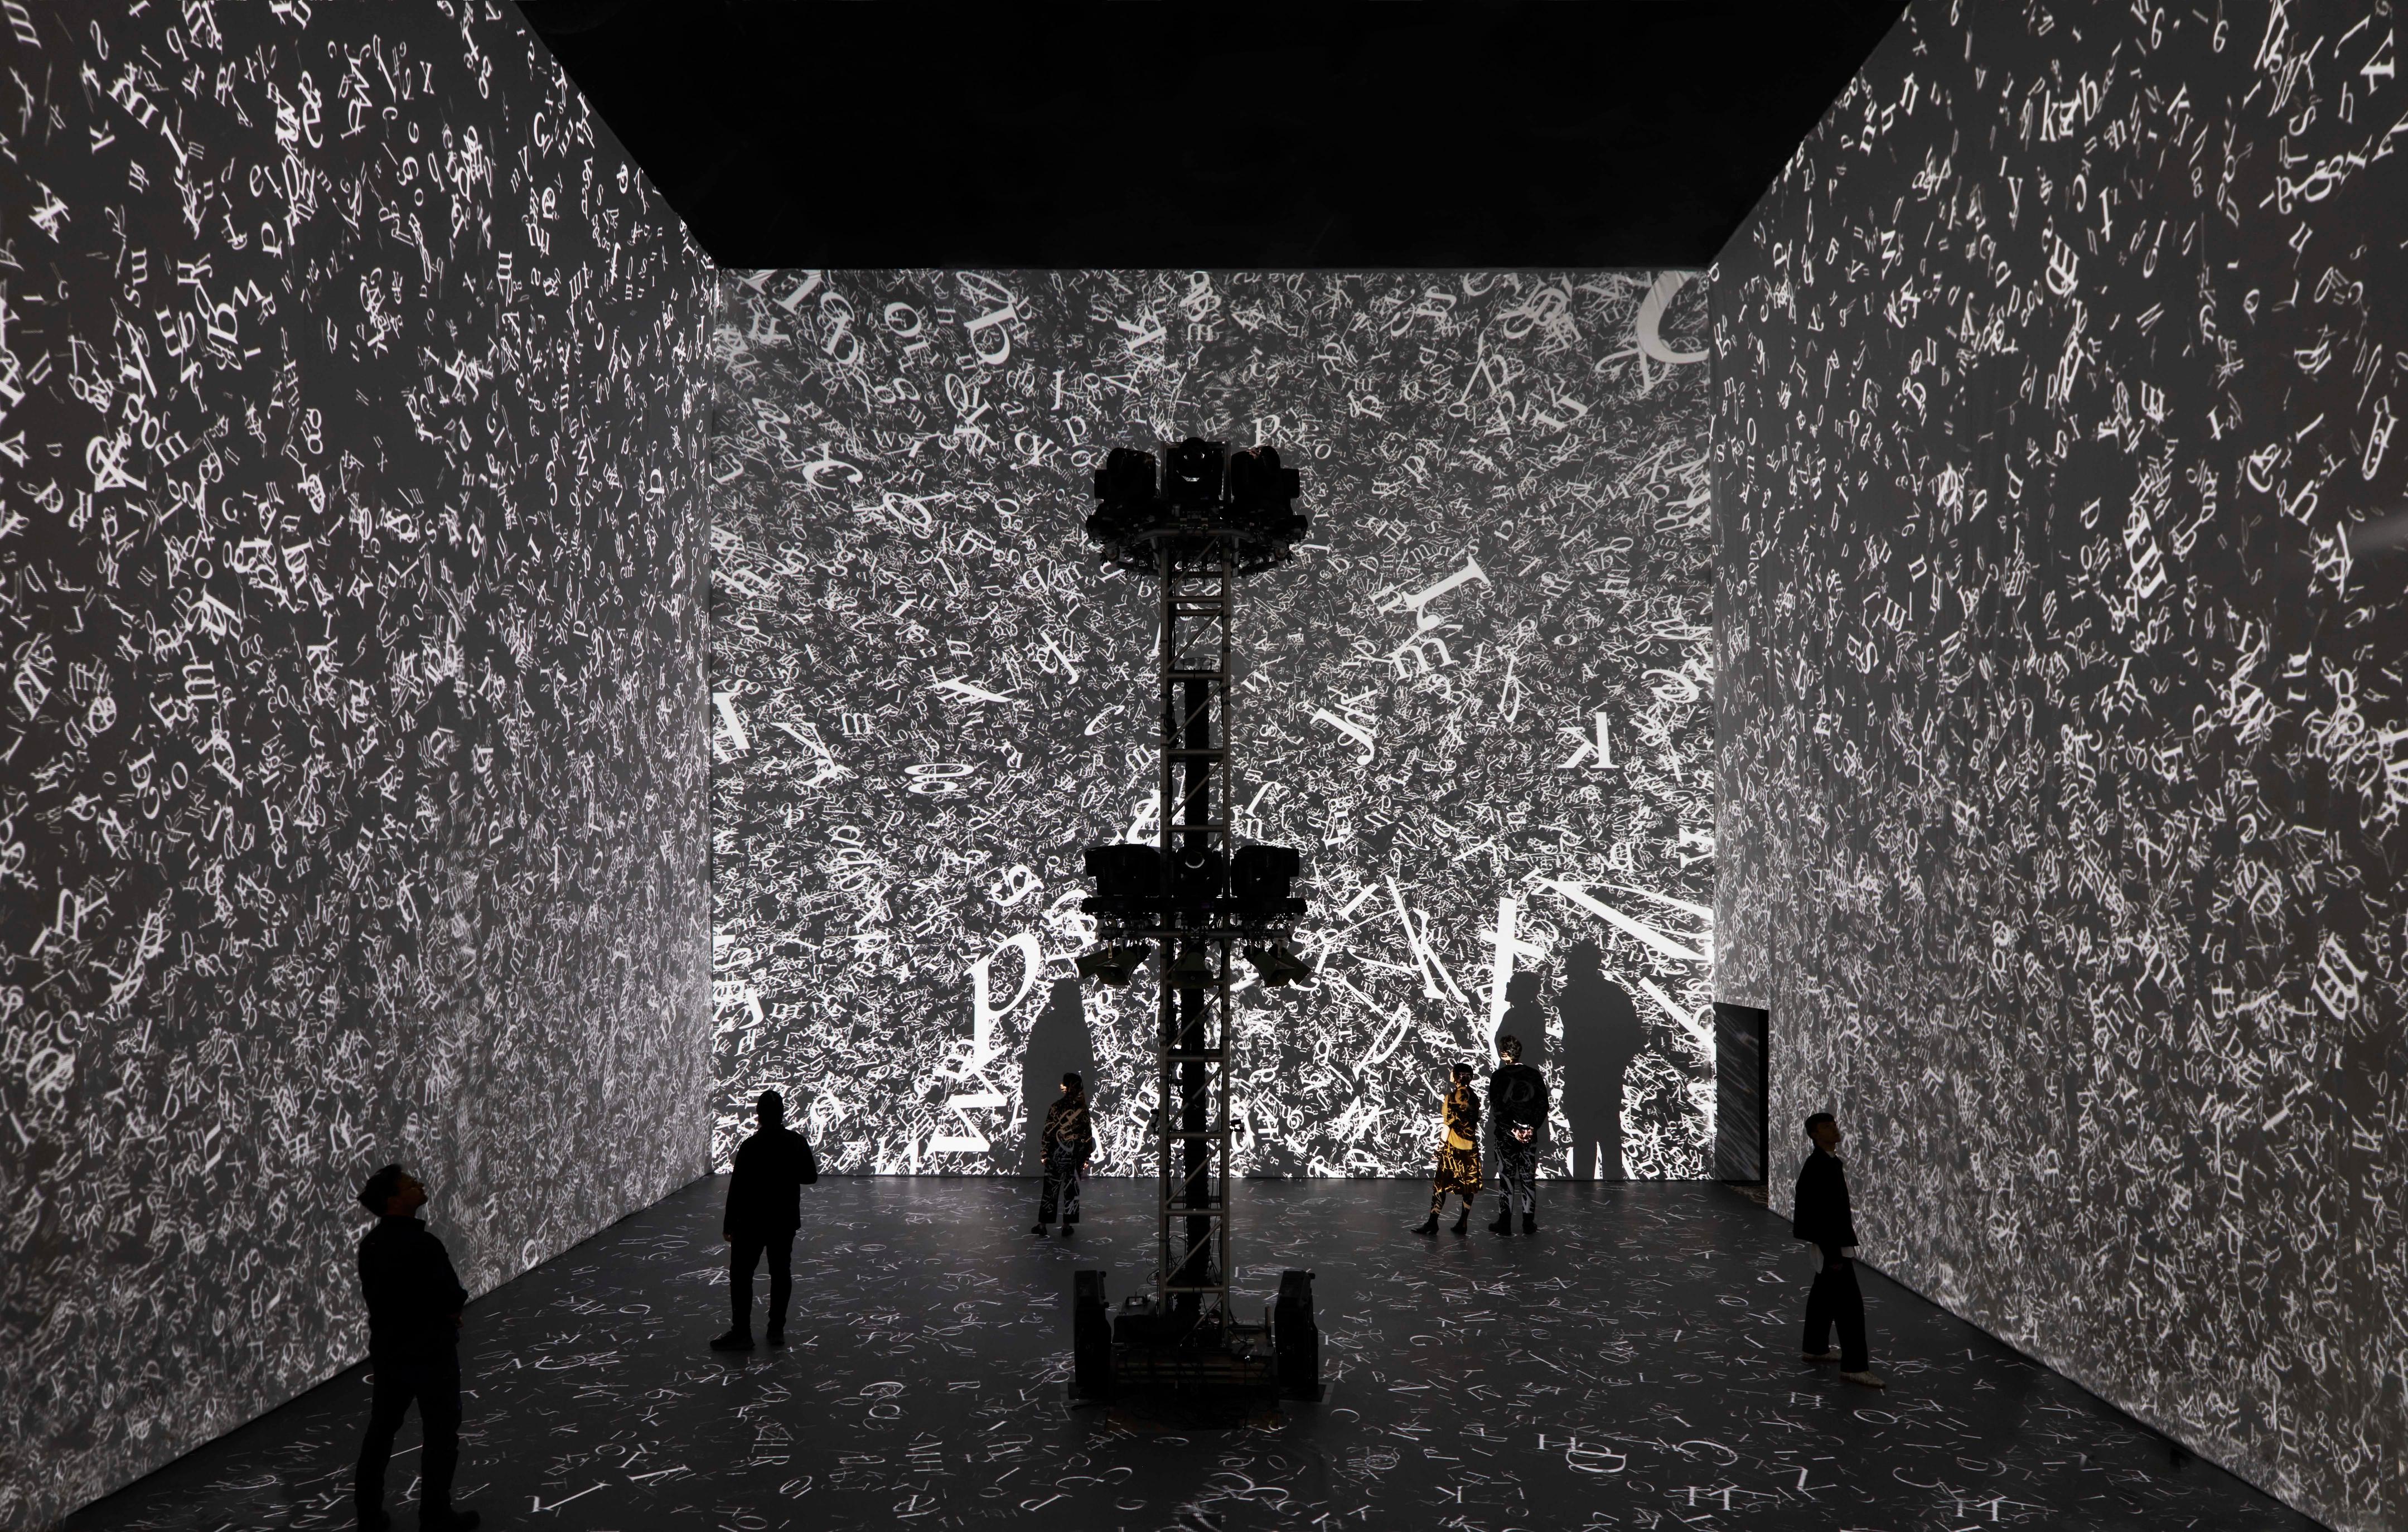 Room filled with projections on every surface